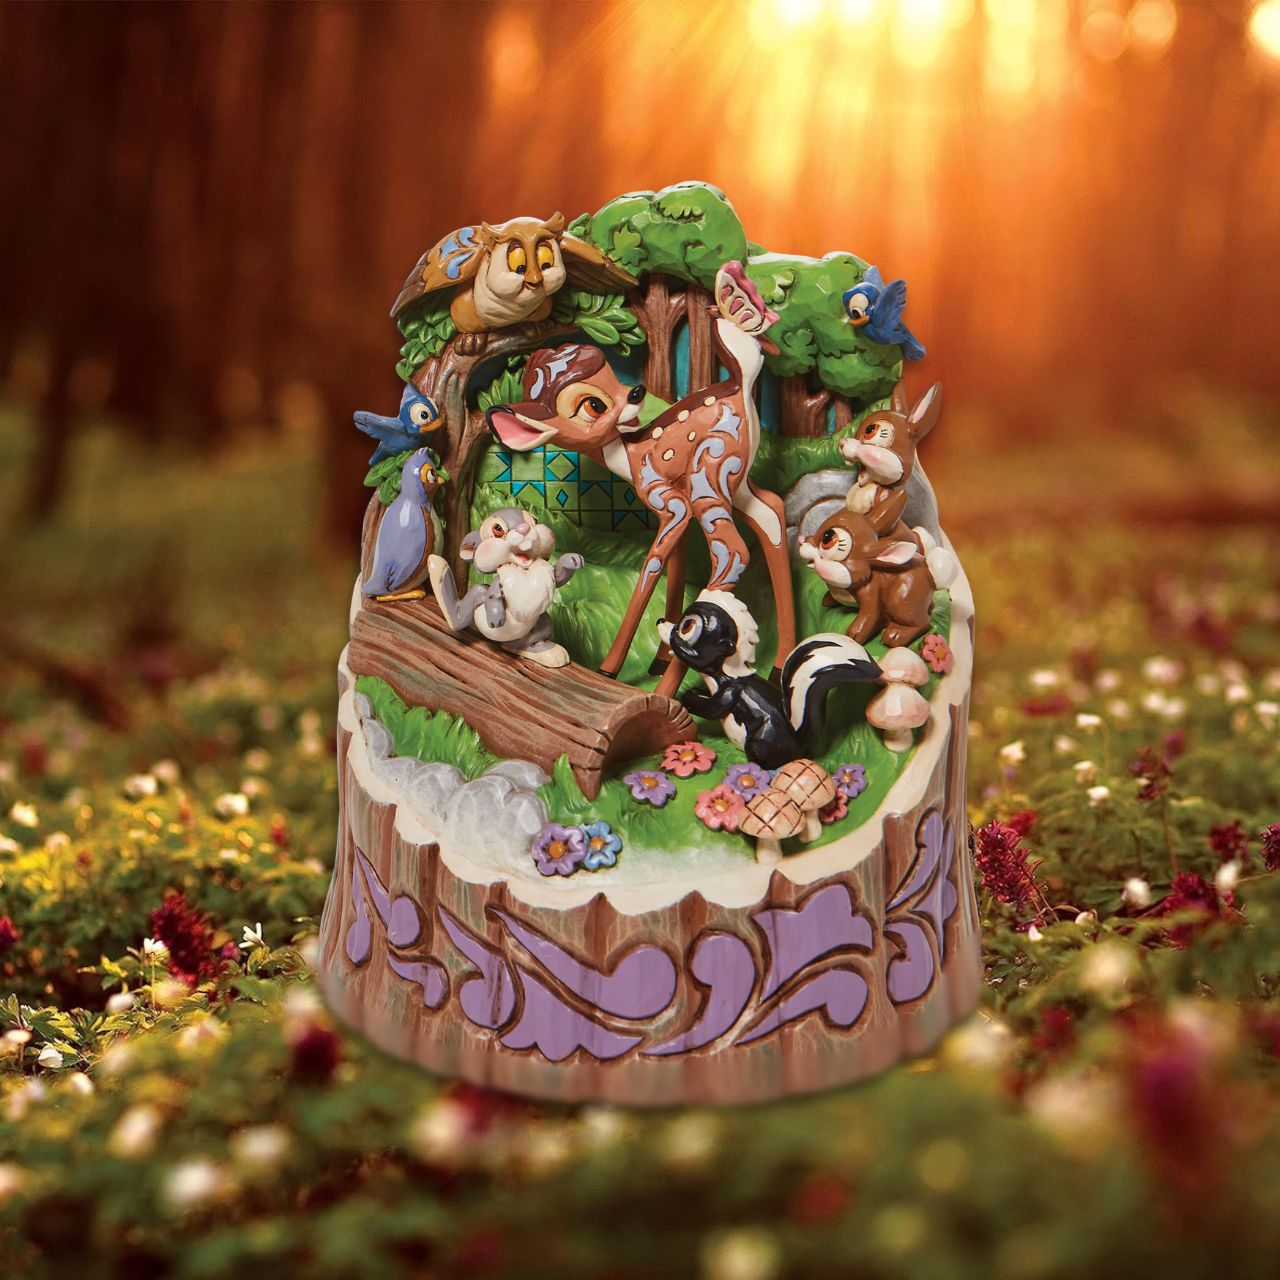 Marvel in the meadow for Bambi's 80th Anniversary celebration. With Jim Shore patterns and details throughout the carved masterpiece, this Disney Traditions figurine displays Bambi and friends Flower and Thumper, smiling together on a Spring day.